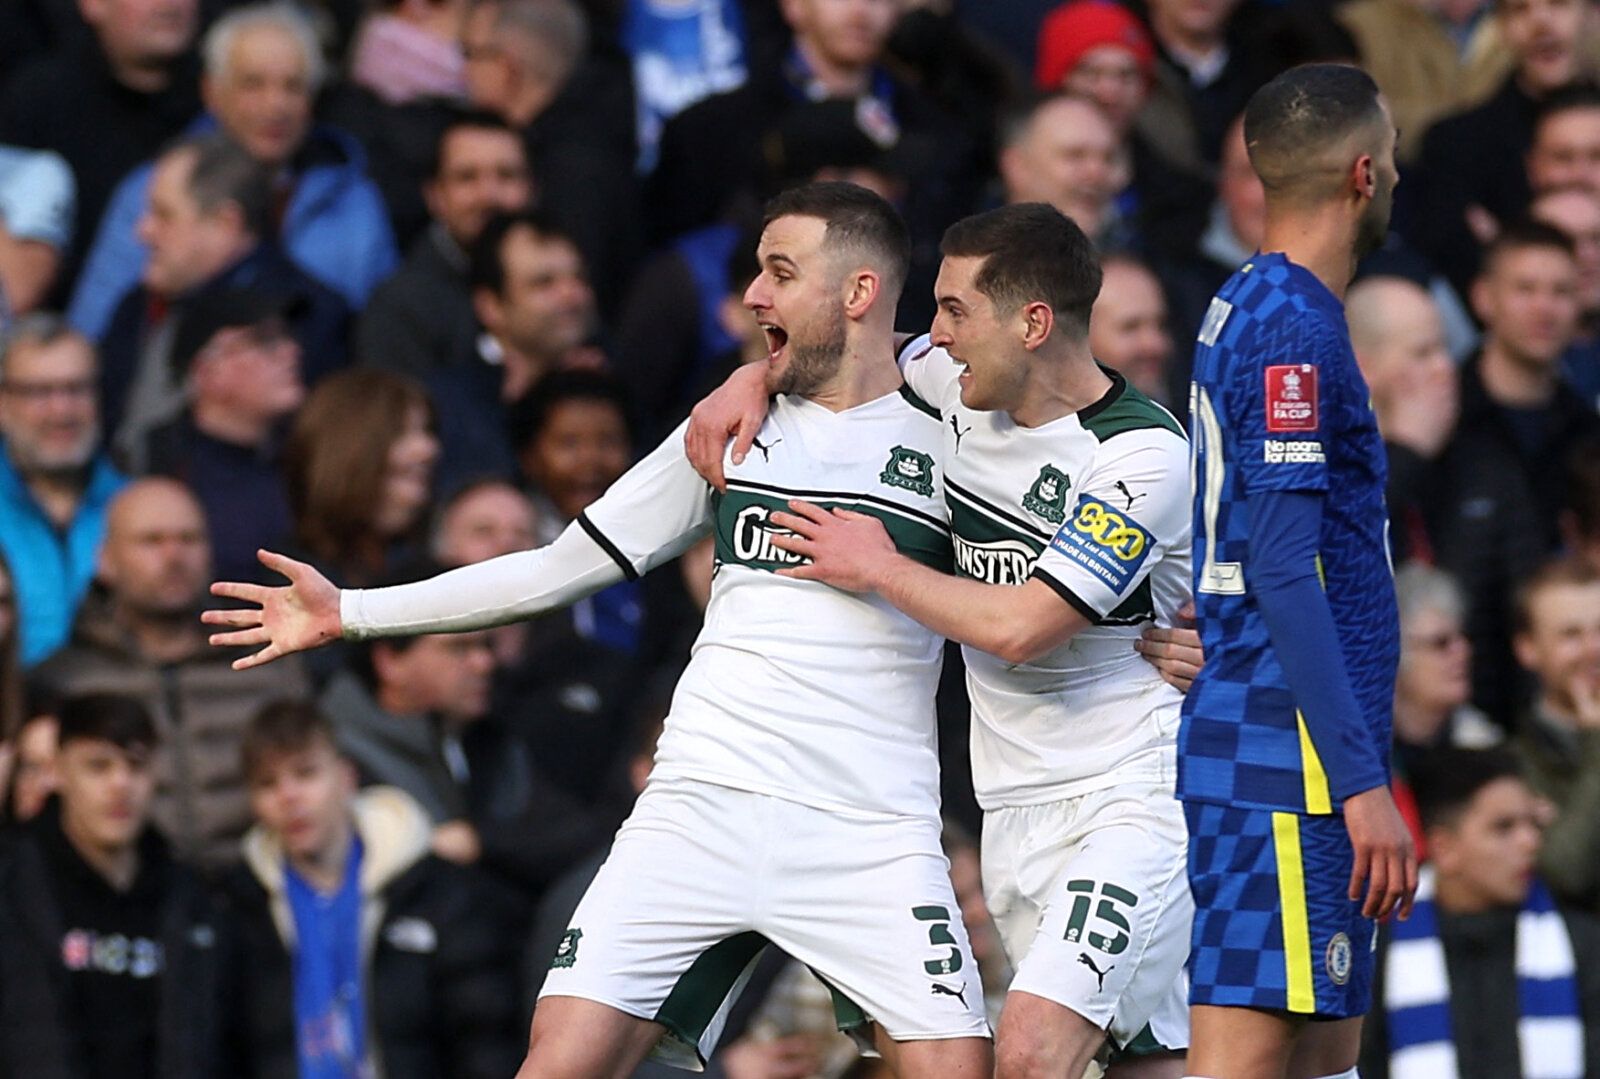 Soccer Football - FA Cup - Fourth Round - Chelsea v Plymouth Argyle - Stamford Bridge, London, Britain - February 5, 2022 Plymouth Argyle's Macaulay Gillesphey celebrates scoring their first goal with Conor Grant Action Images via Reuters/Paul Childs